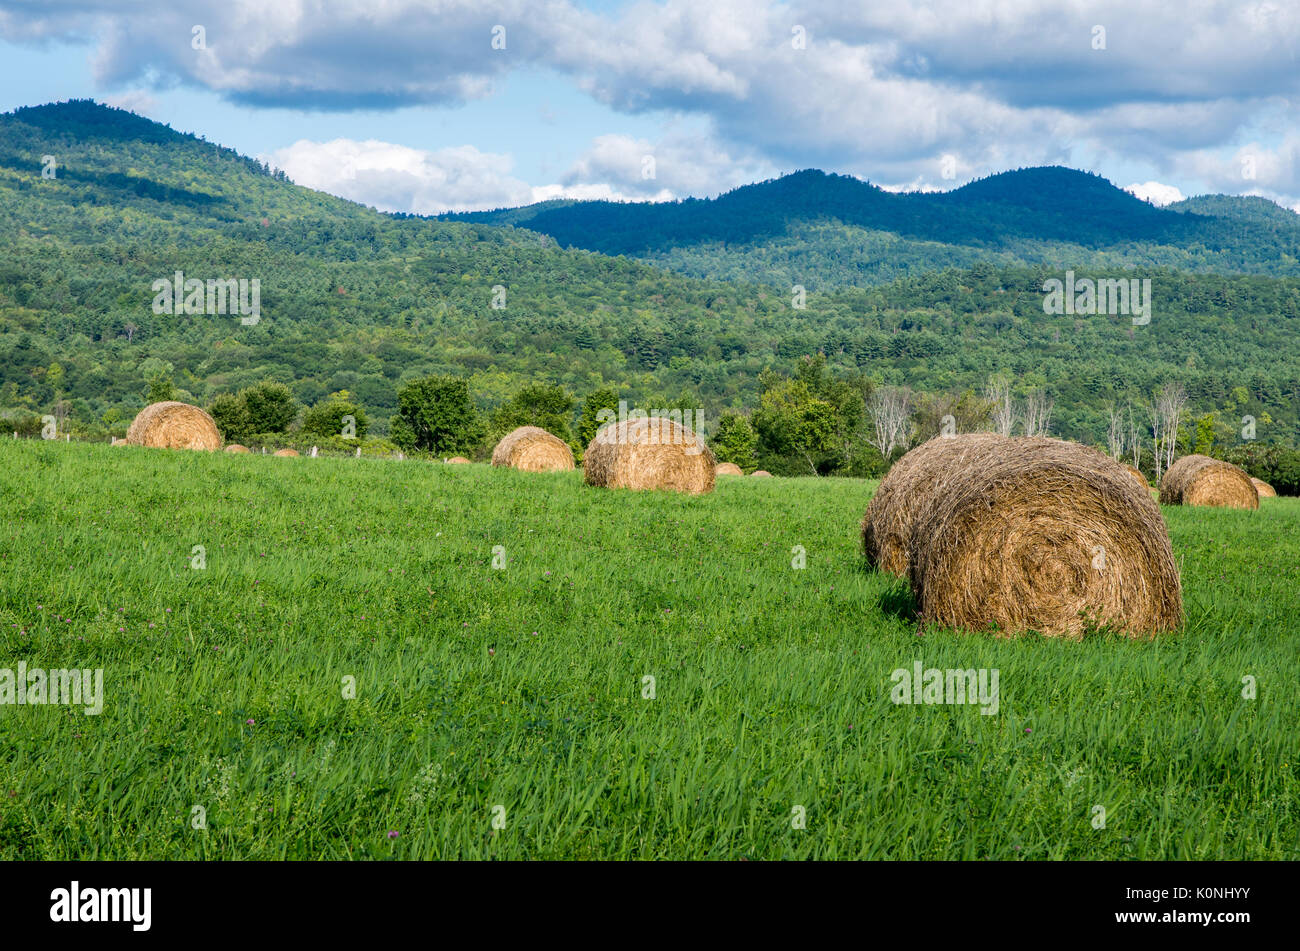 Round hay bales in a field with the Adirondack mountains in the background and blue sky with some clouds Stock Photo